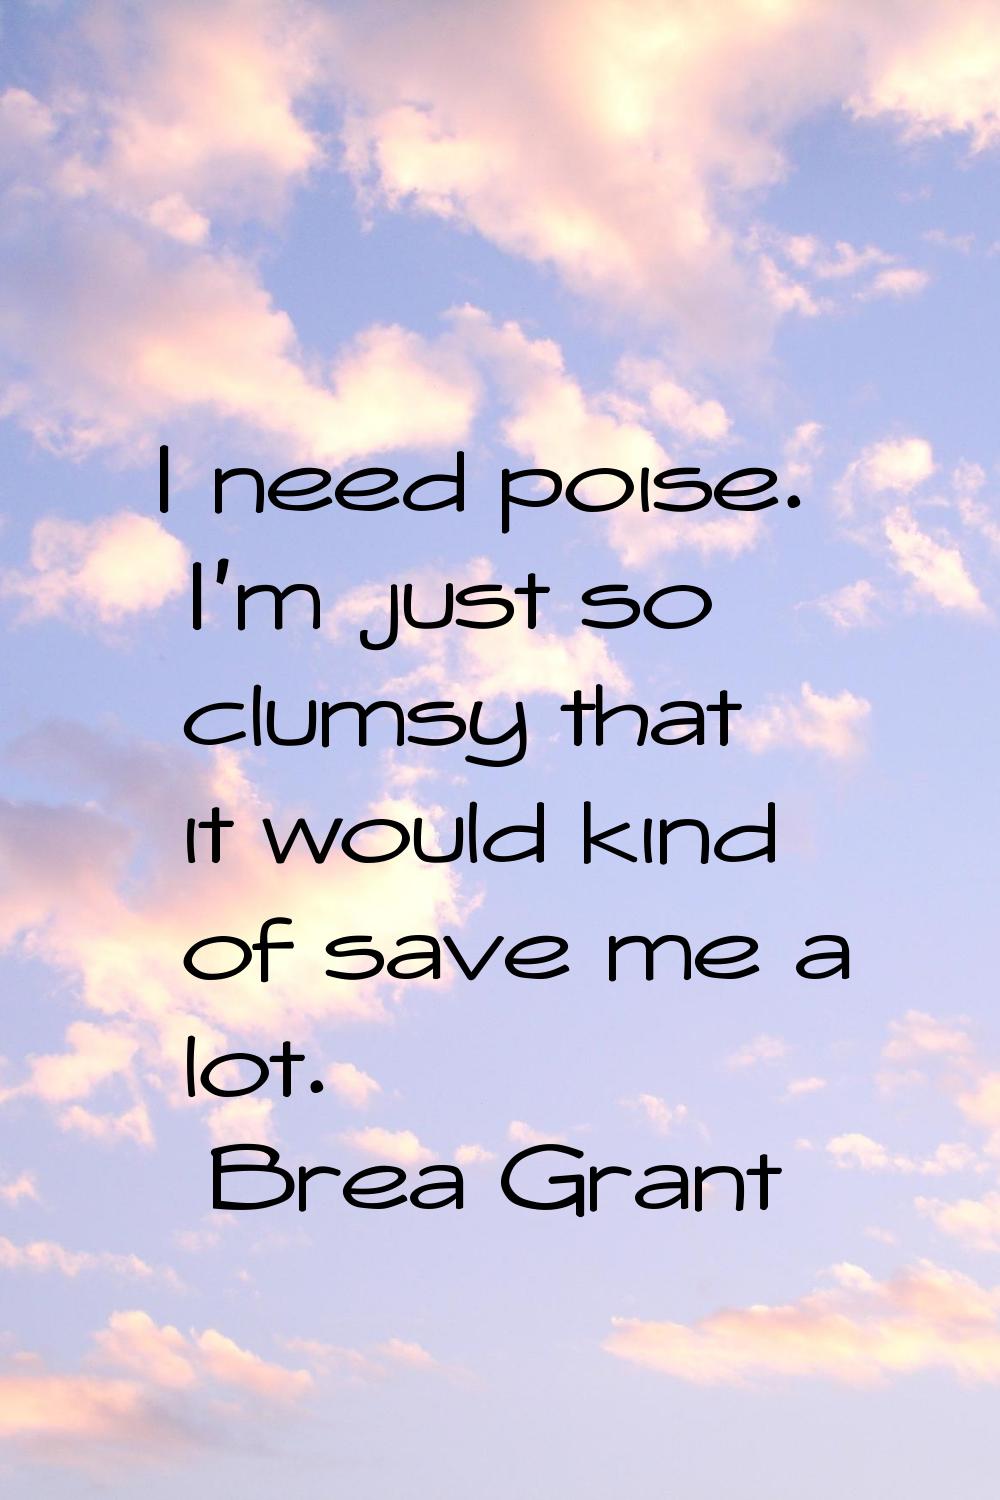 I need poise. I'm just so clumsy that it would kind of save me a lot.